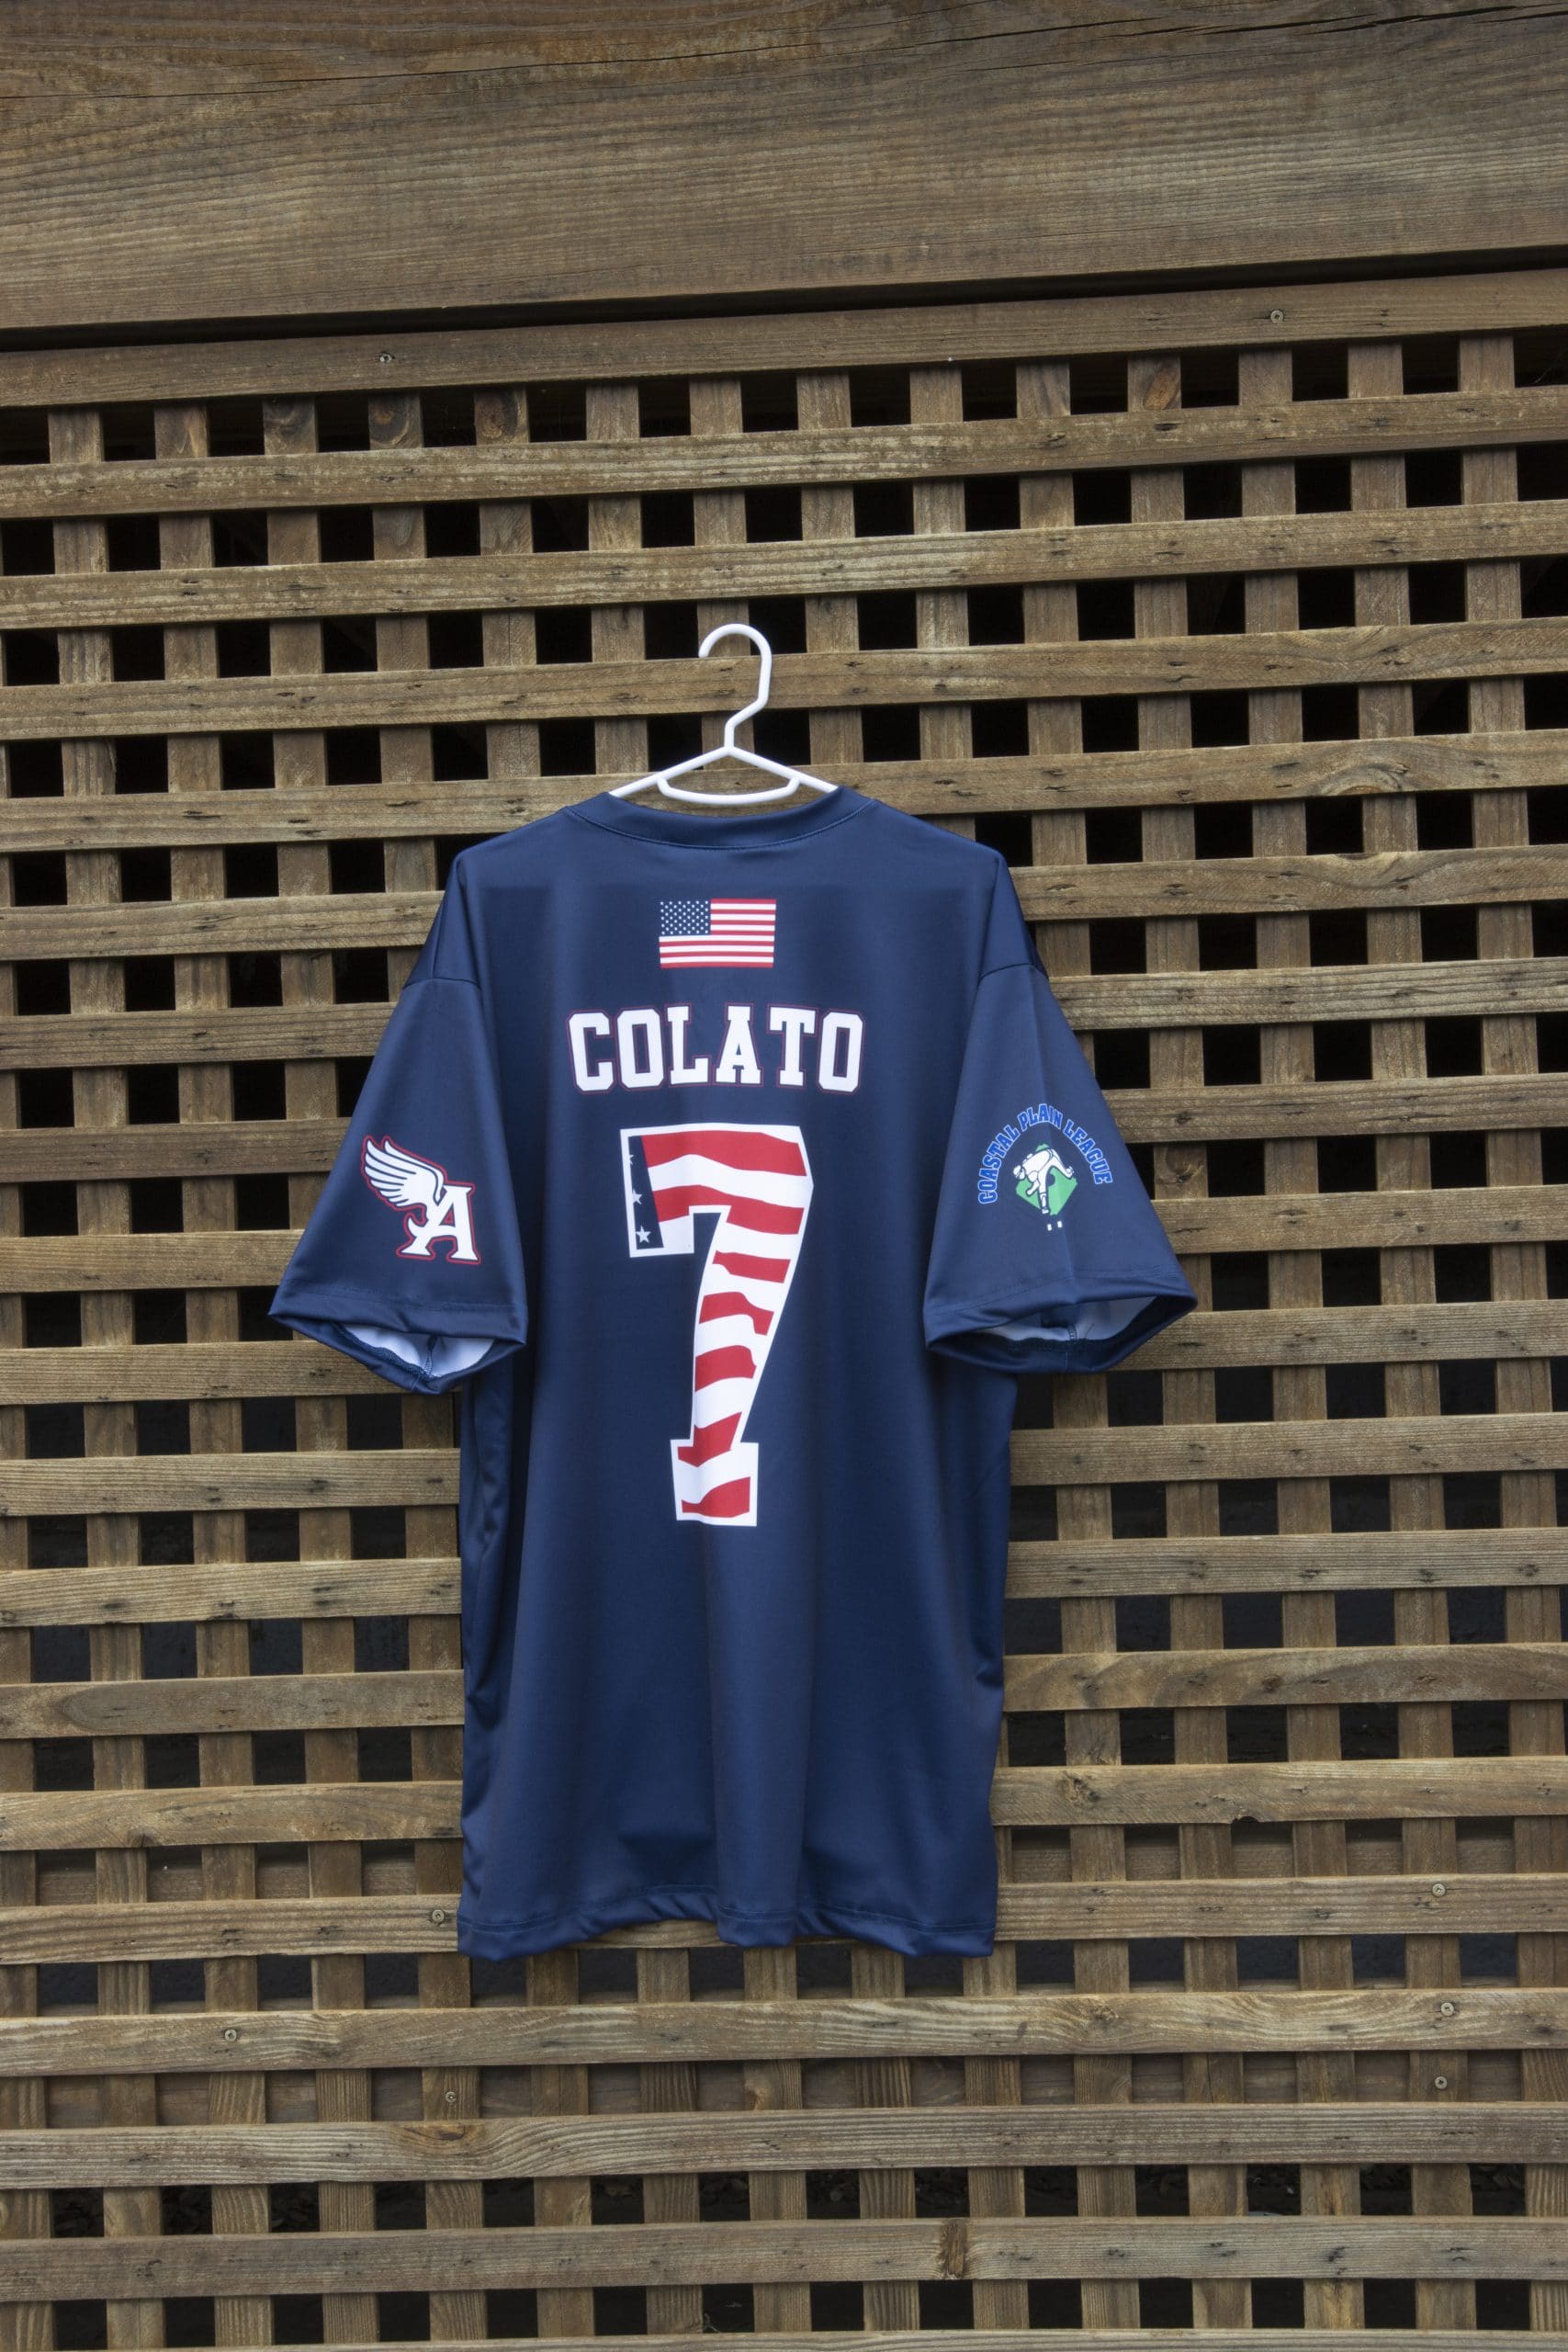 salute the troops jersey